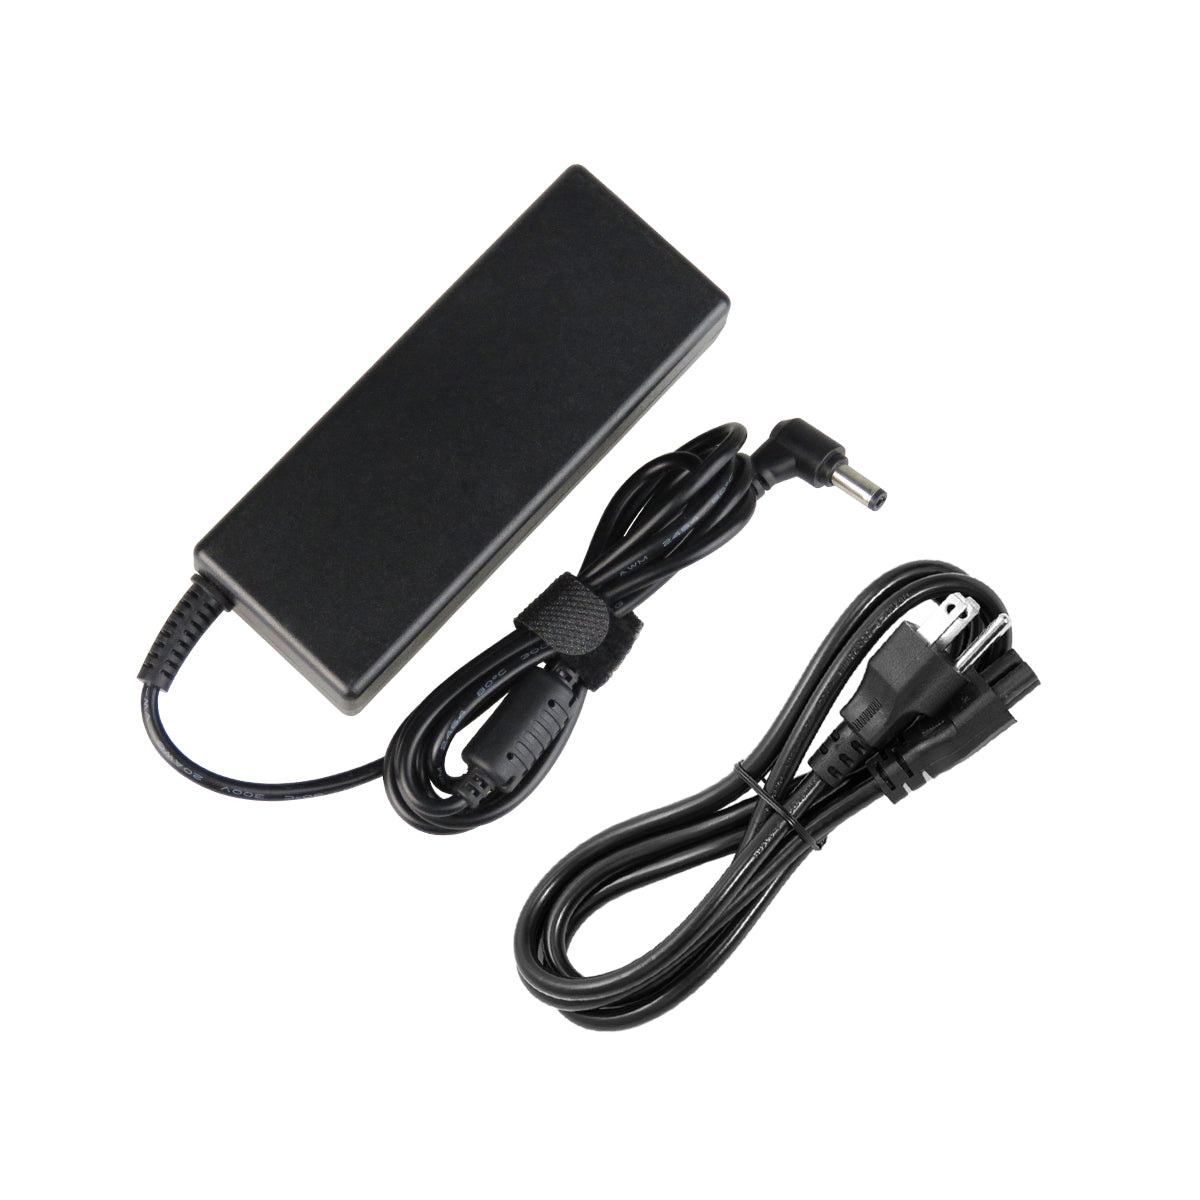 AC Adapter Charger for Toshiba Satellite l55-a5278 Notebook.